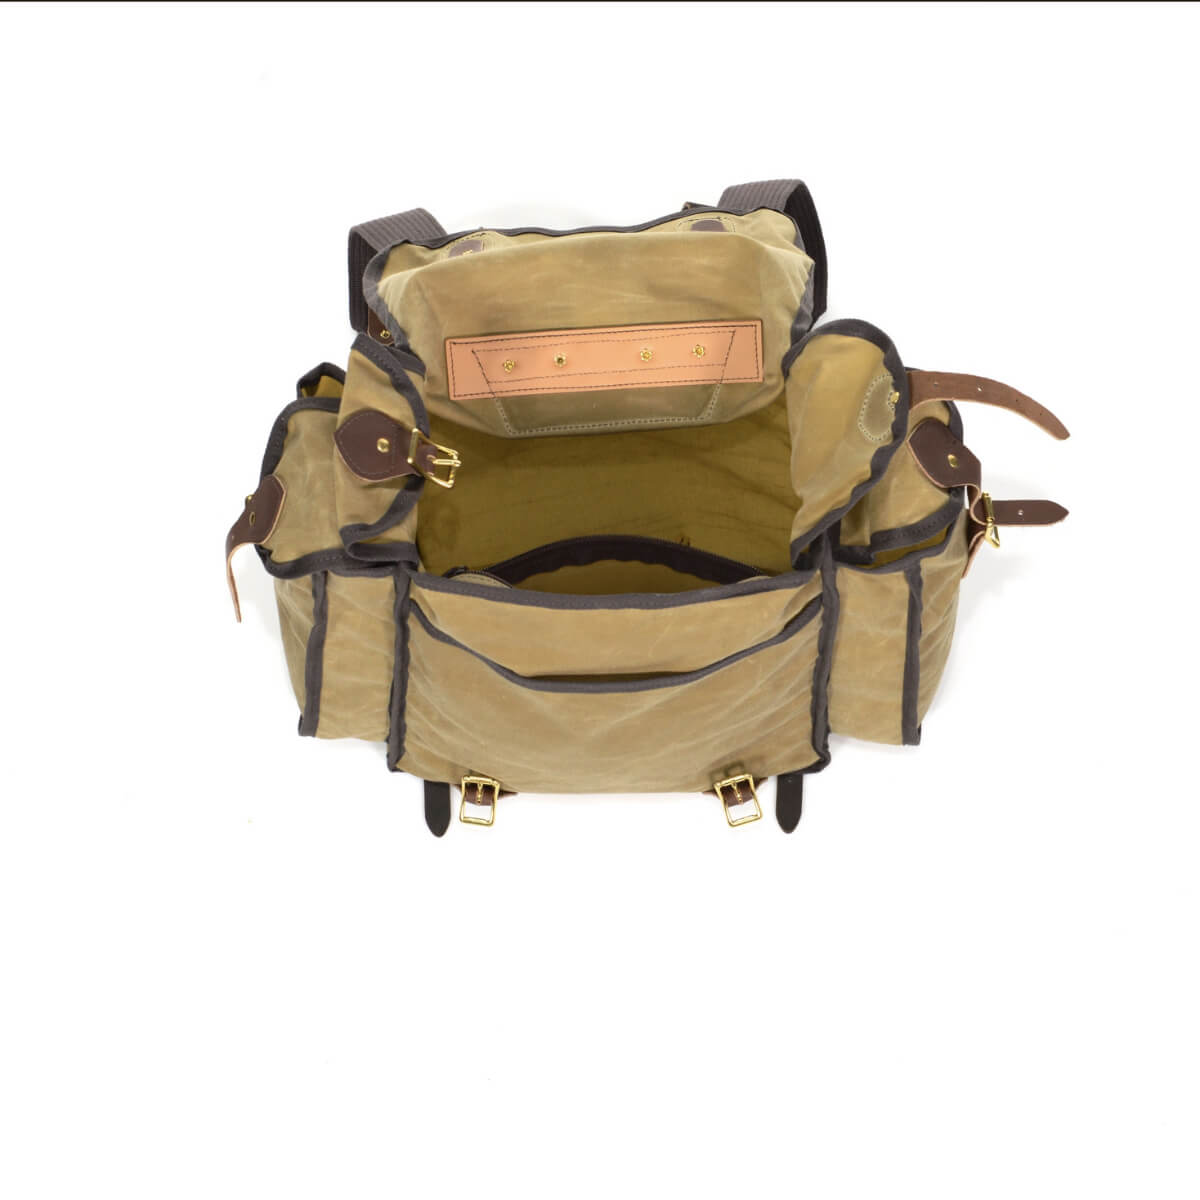 Frost River Cliff Jacobson Signature Pack, vintage style back pack